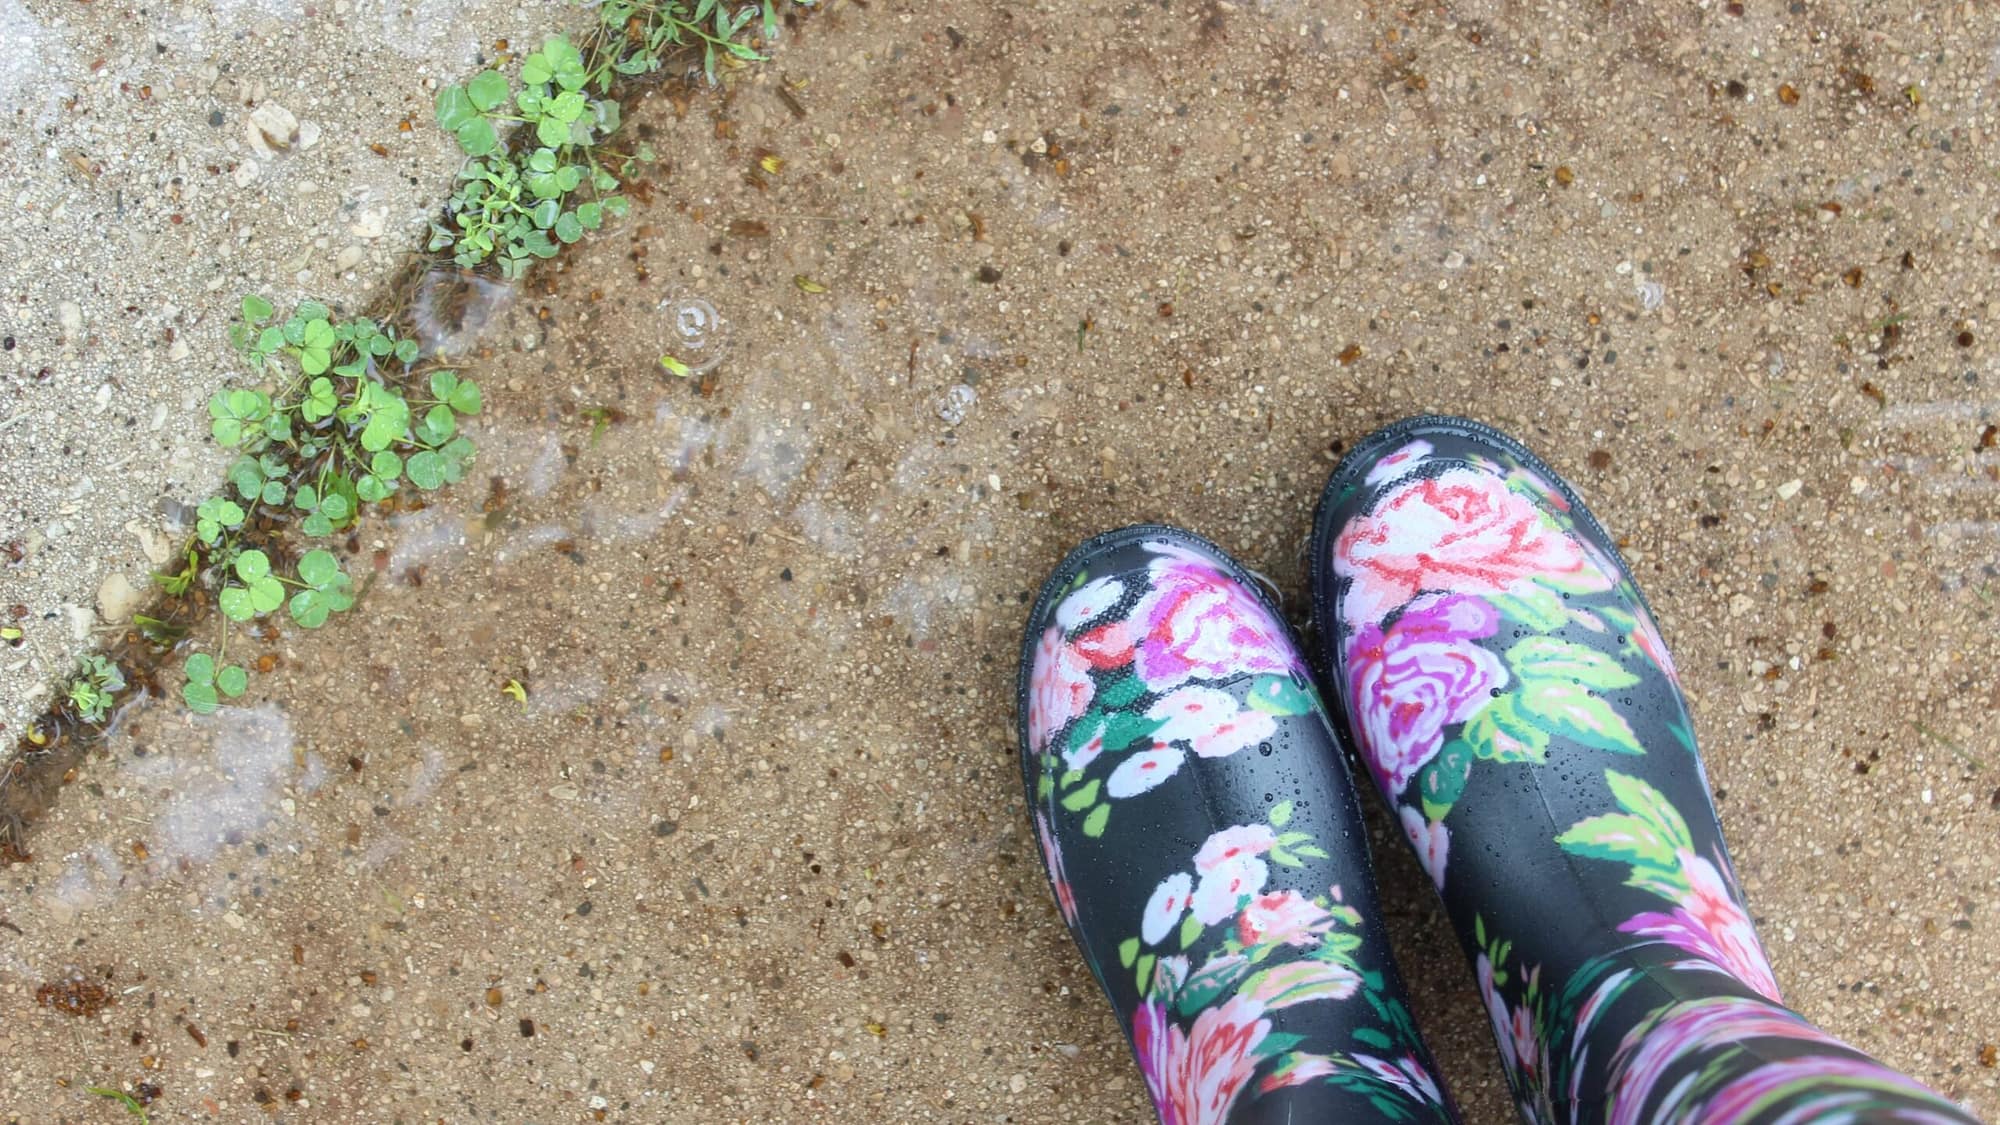 Image: Weeds growing in the cracks of a sidewalk, and a pair of floral patterned rain boots.